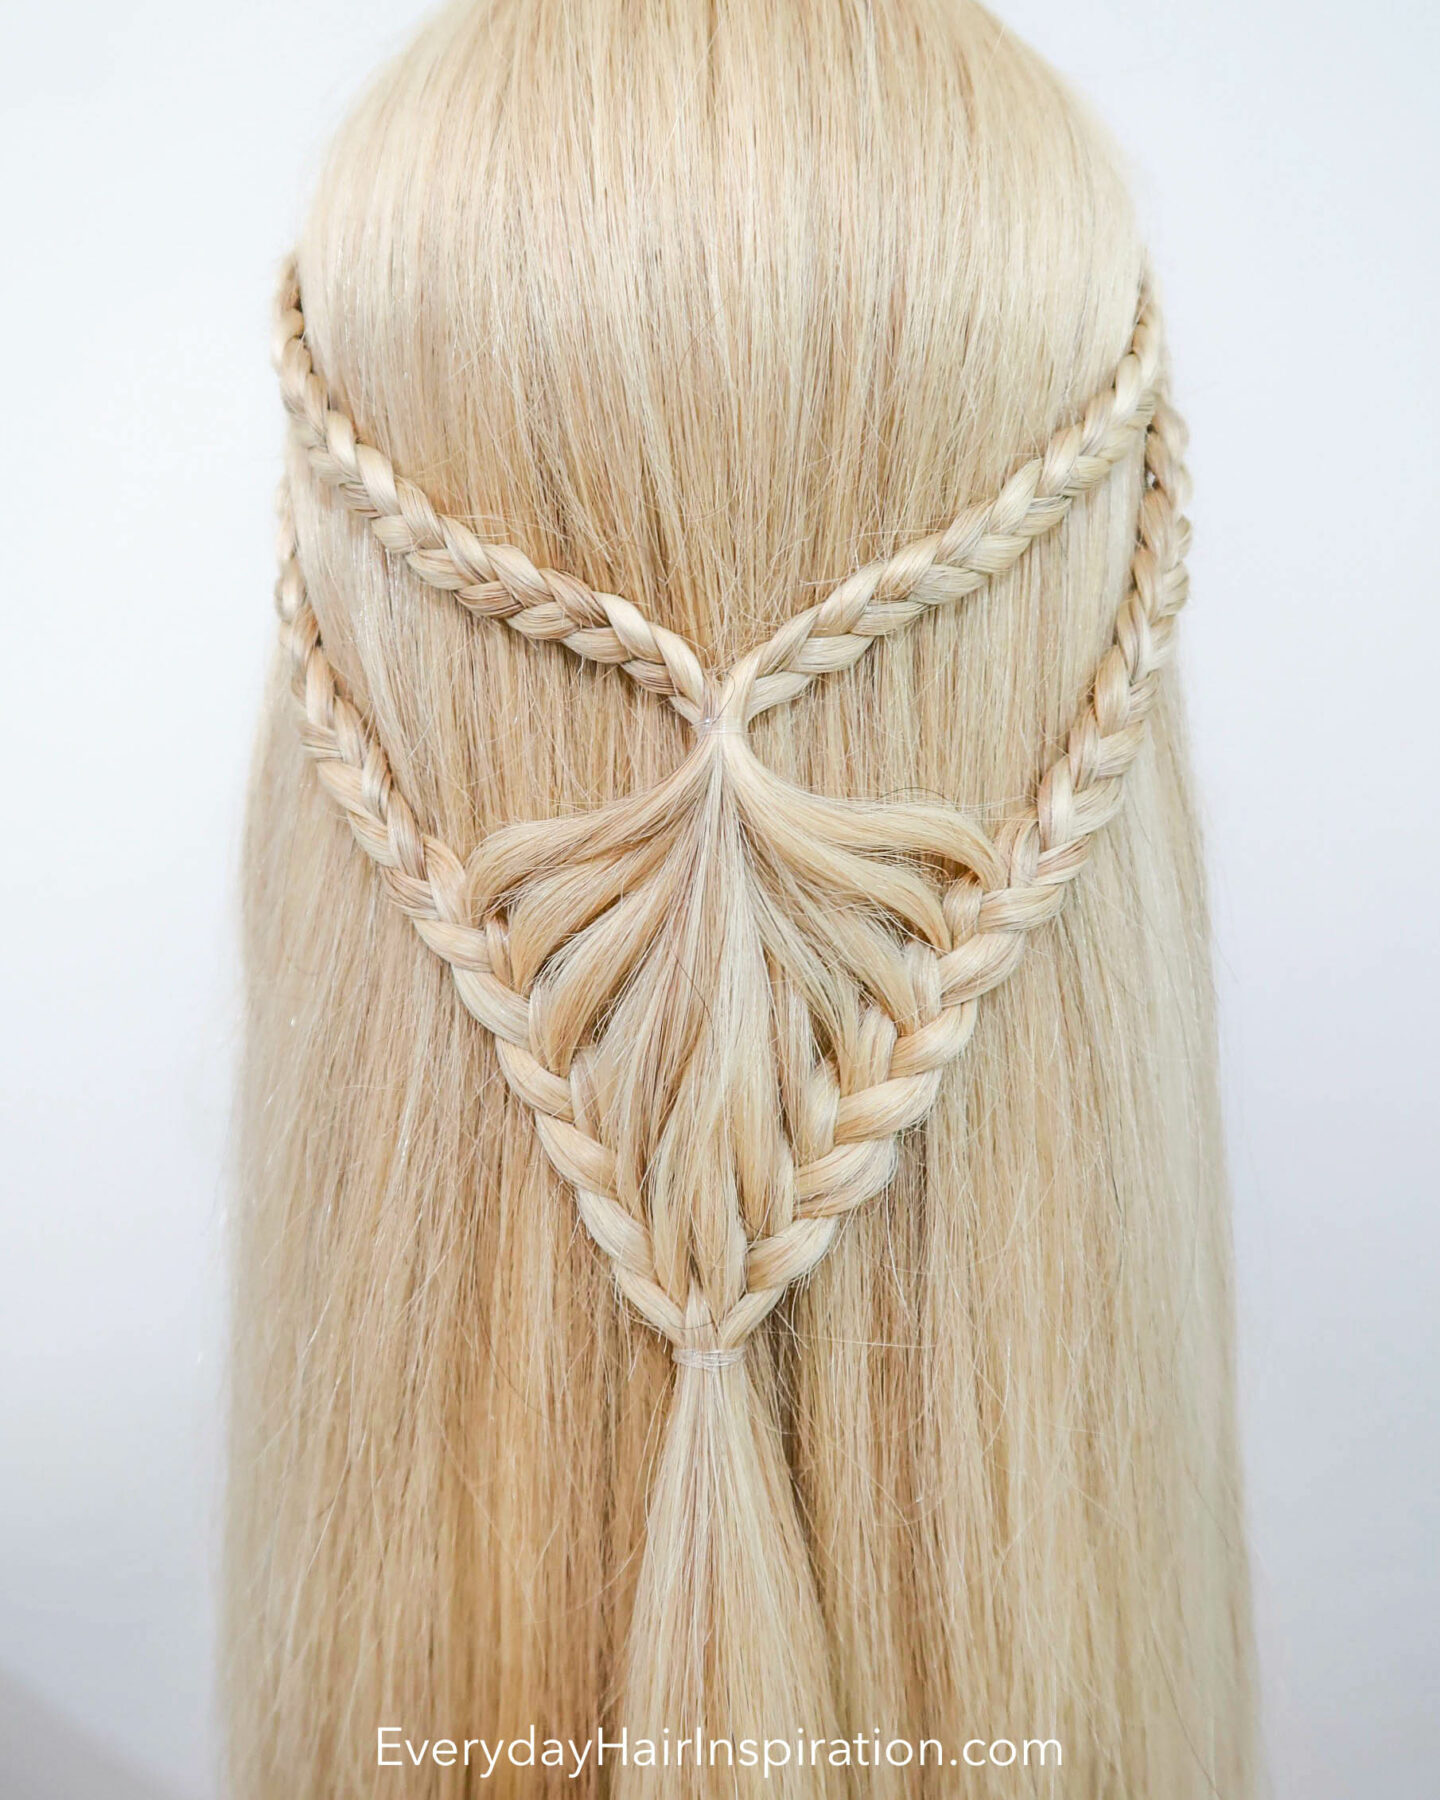 Double Braided Half up - Everyday Hair inspiration